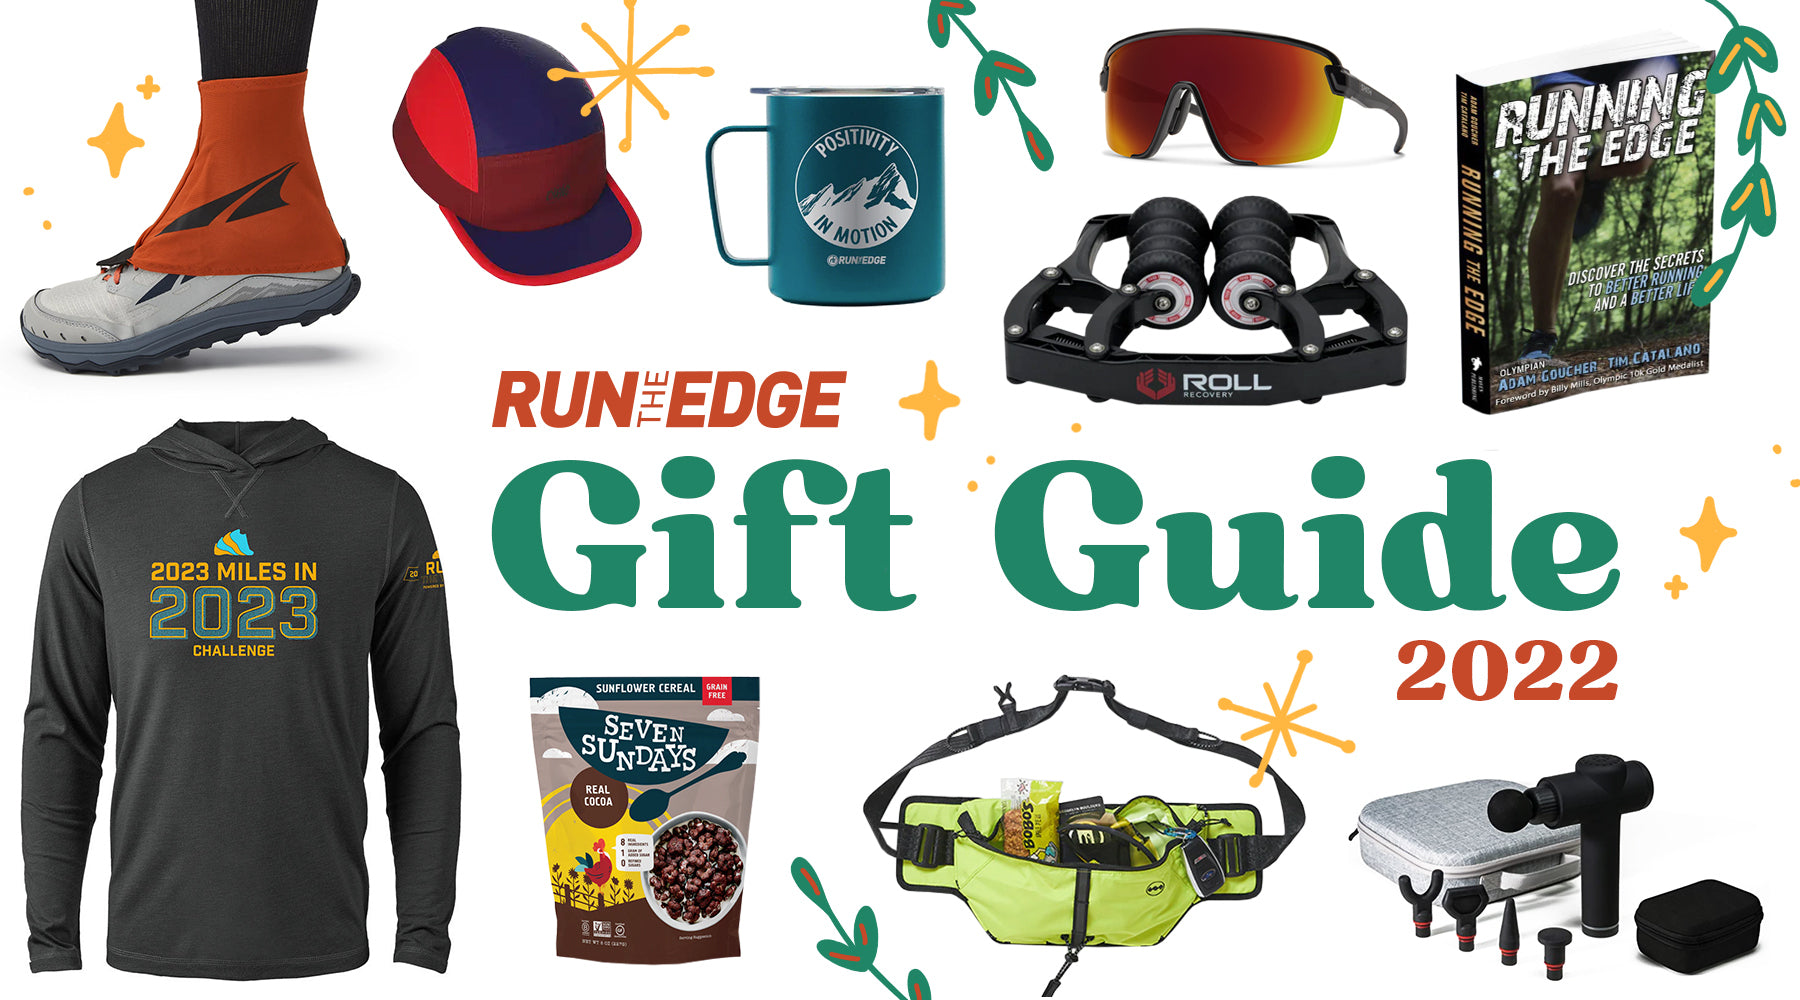 2022 holiday gift guide for the runners in your life